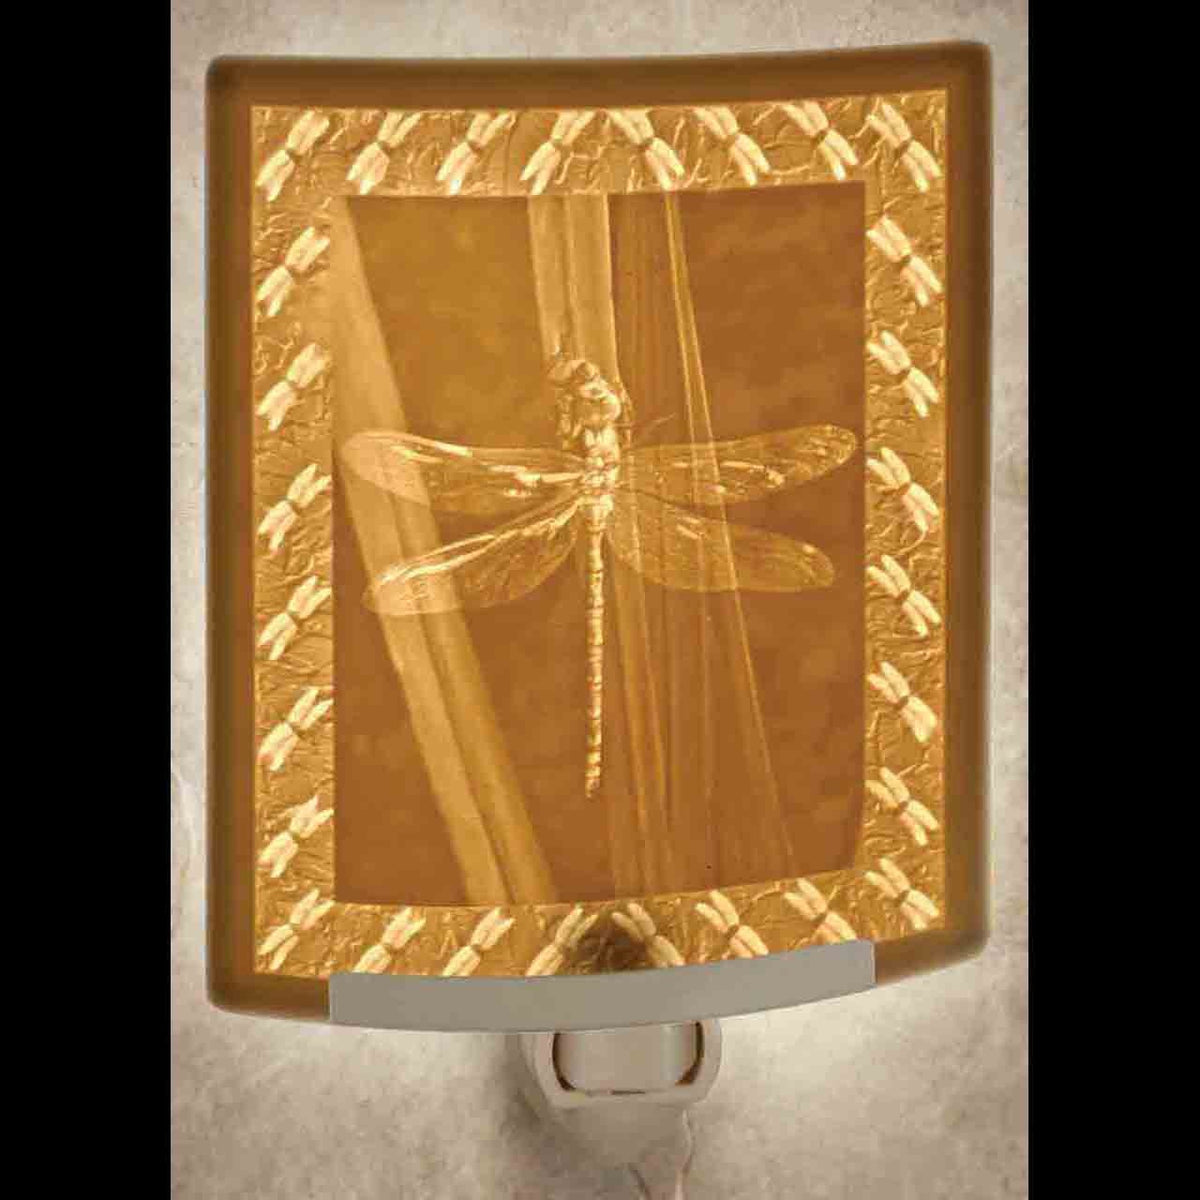 Curved Night Light - Dragonfly